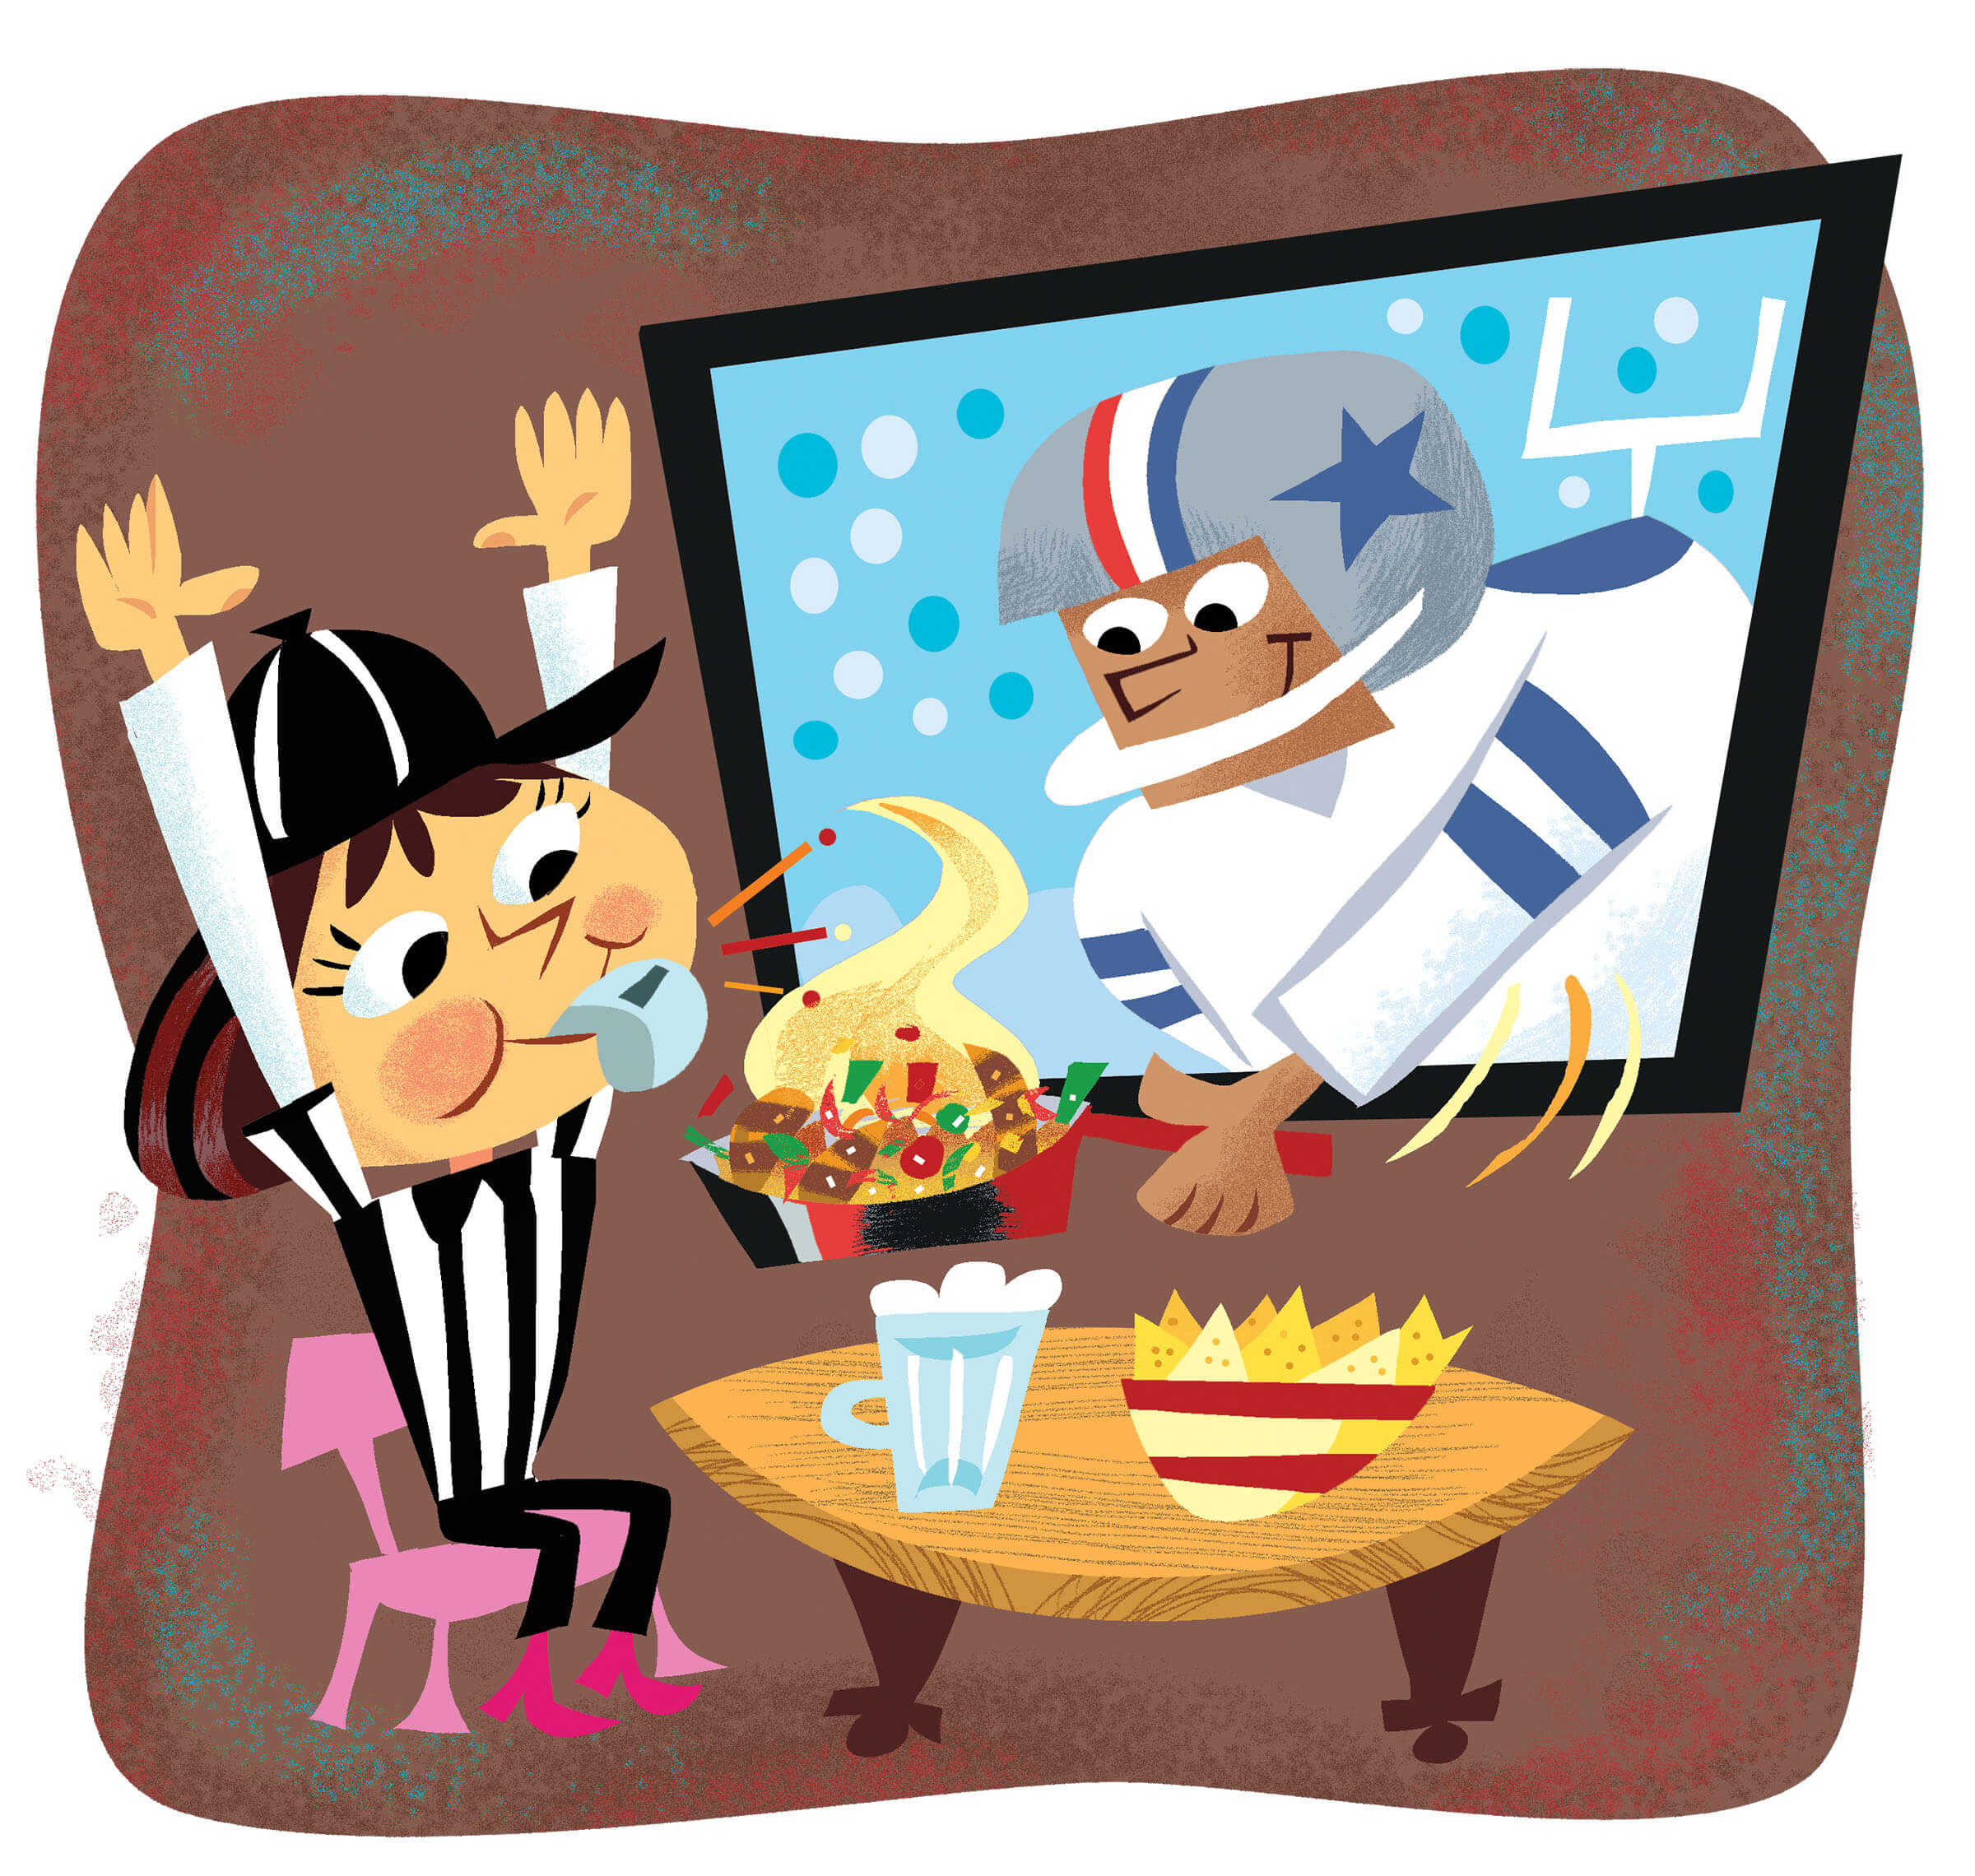 A cartoon illustration of a person in a referee uniform sitting at a table while a footbalal player emerges from a screen and steals a plate of nachos